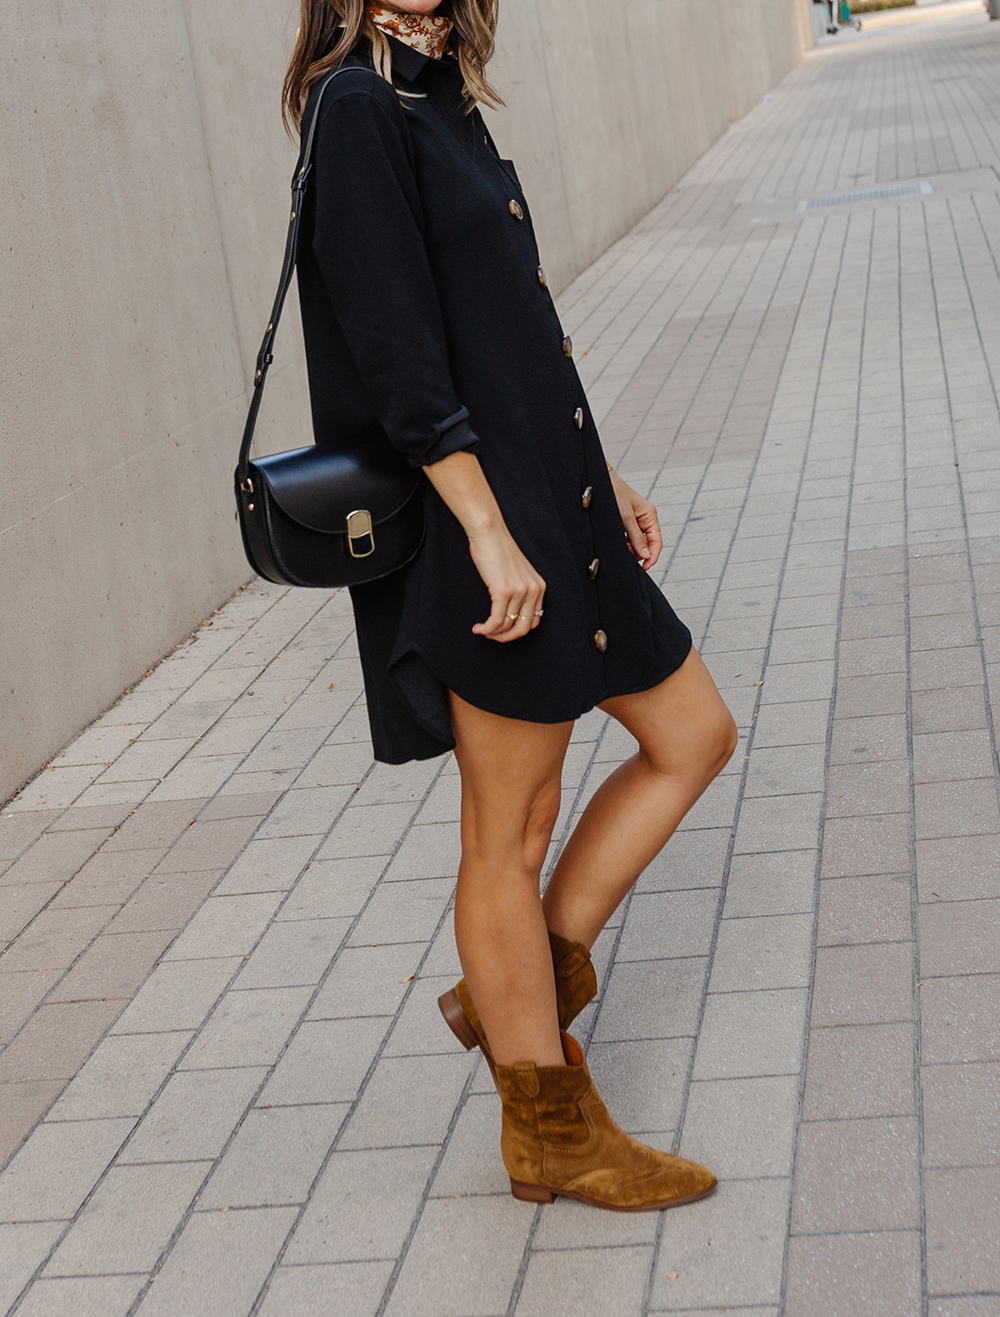 olivia-watson-livvyland-blog-sezane-sadie-dress-gabrielle-low-western-suede-boots-fall-outfit-1